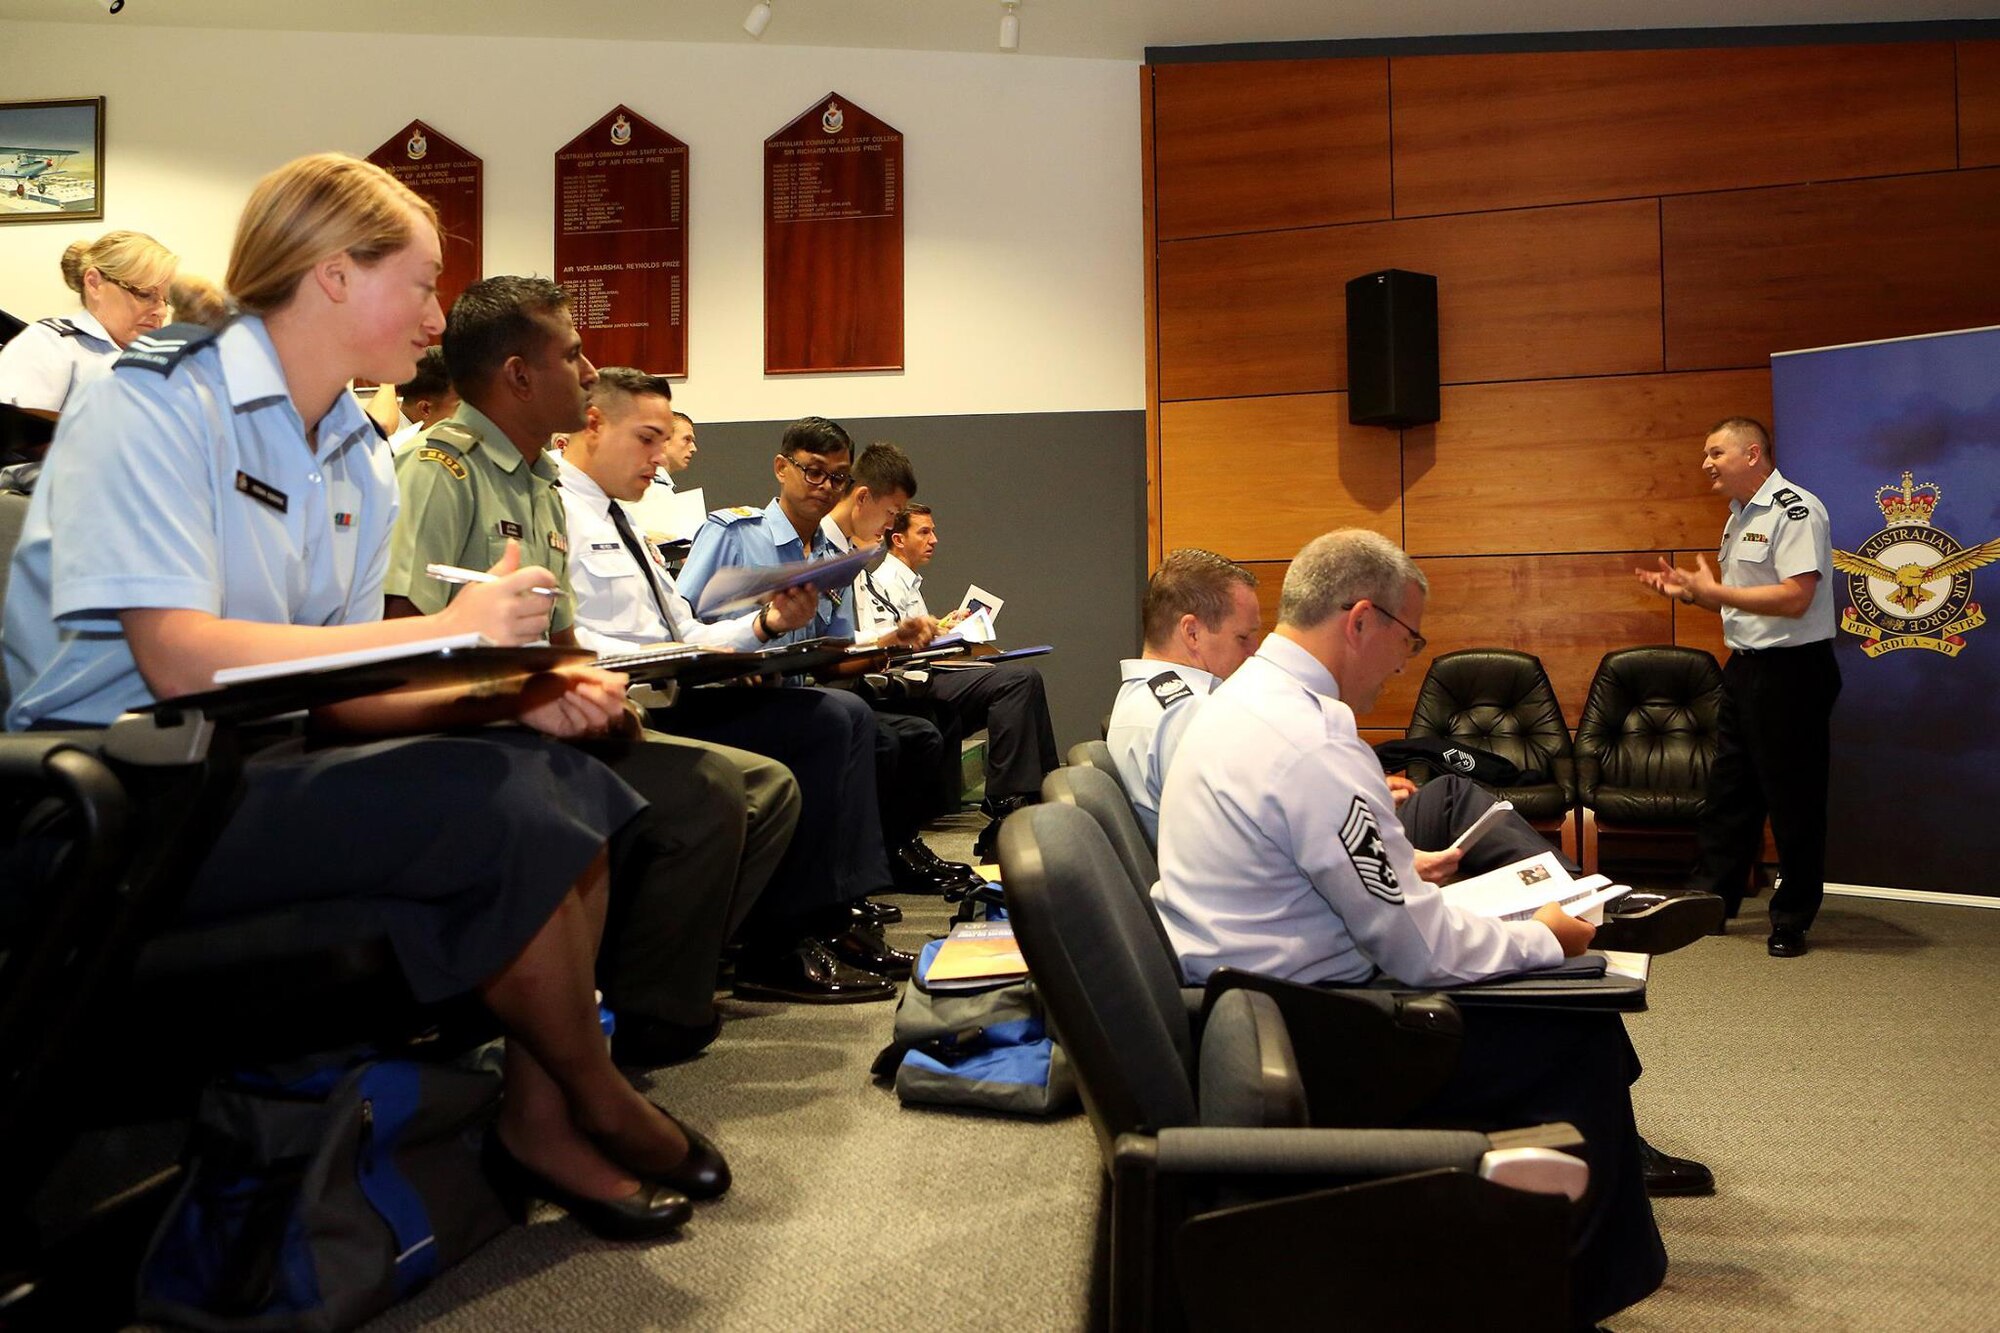 Royal Australian Air Force Warrant Officer David Coles gives a presentation on 'Air Power across the Pacific' to the Pacific Region Junior Enlisted Airmen at the first Pacific Rim Junior Enlisted Leadership Forum in Canberra, Australia, Sept. 29, 2015. The forum allowed participants to share experiences concerning leadership and fundamentals of air power across the Pacific. (Courtesy photo)